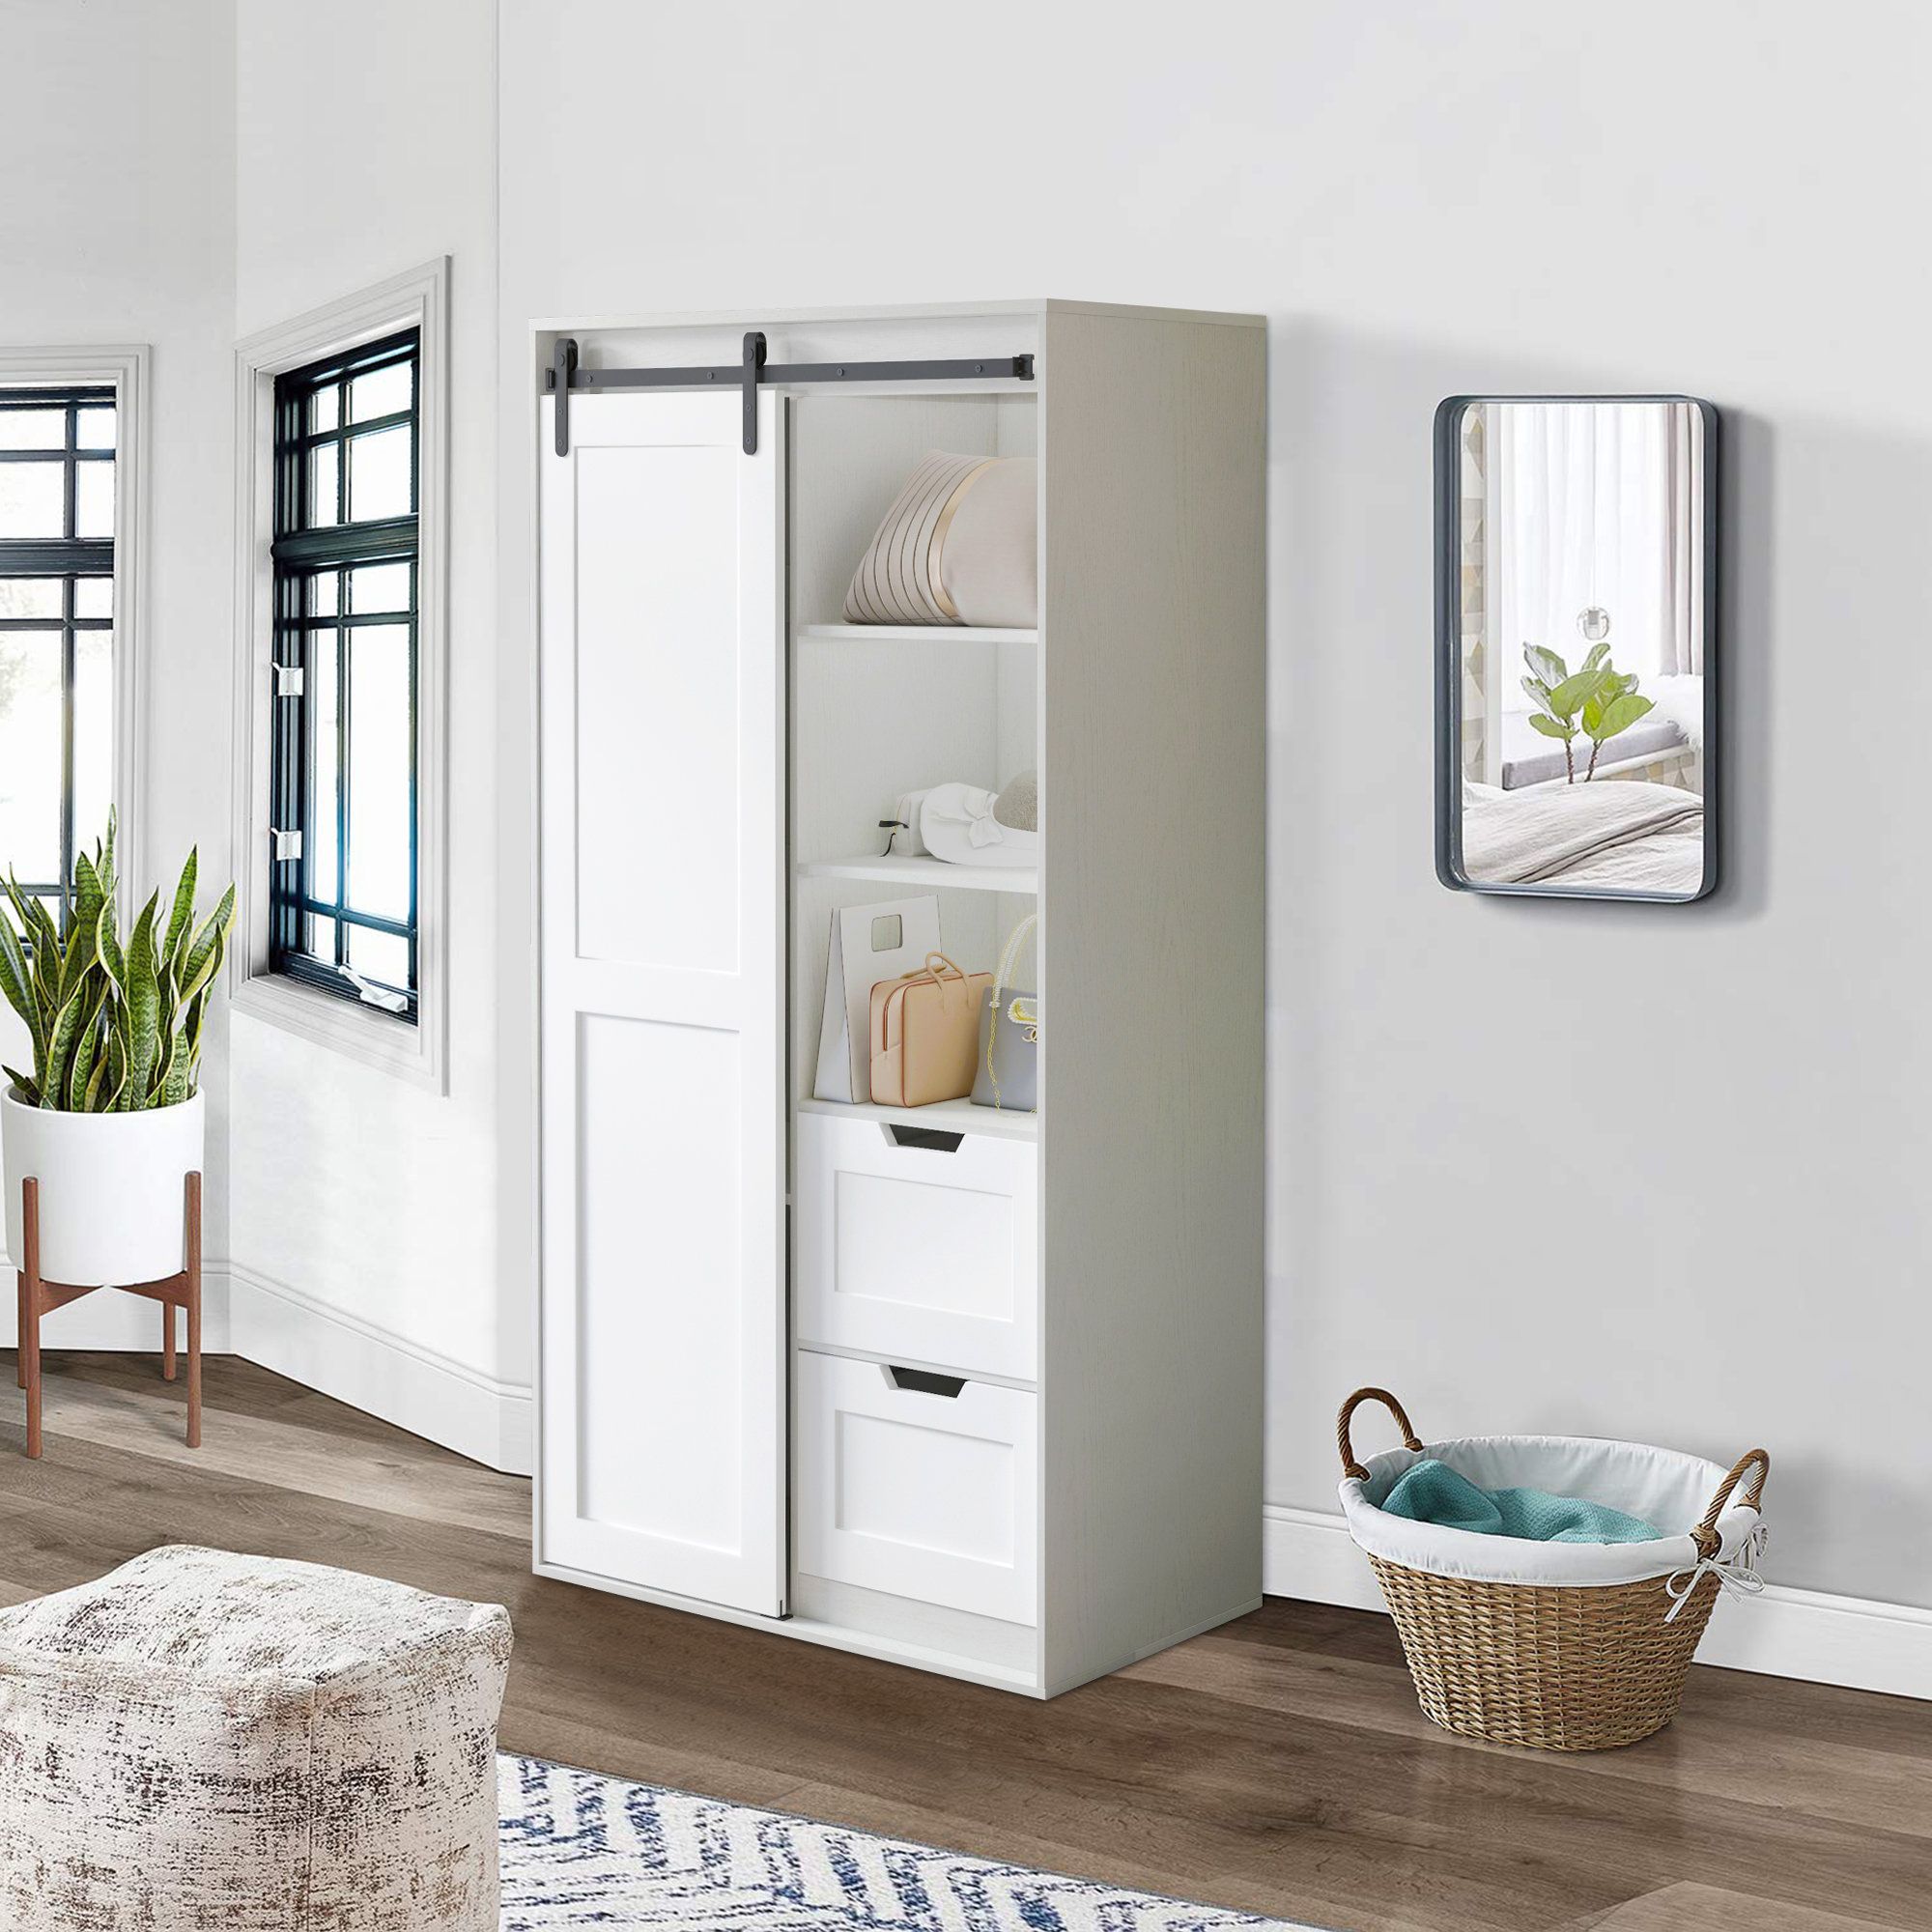 Gracie Oaks Cathkin 71"h Wardrobe Closet With Hanging Rod, Cabinet With 2  Drawers & 2 Shelves, Sliding Door | Wayfair Intended For Wardrobes With Hanging Rod (View 9 of 20)